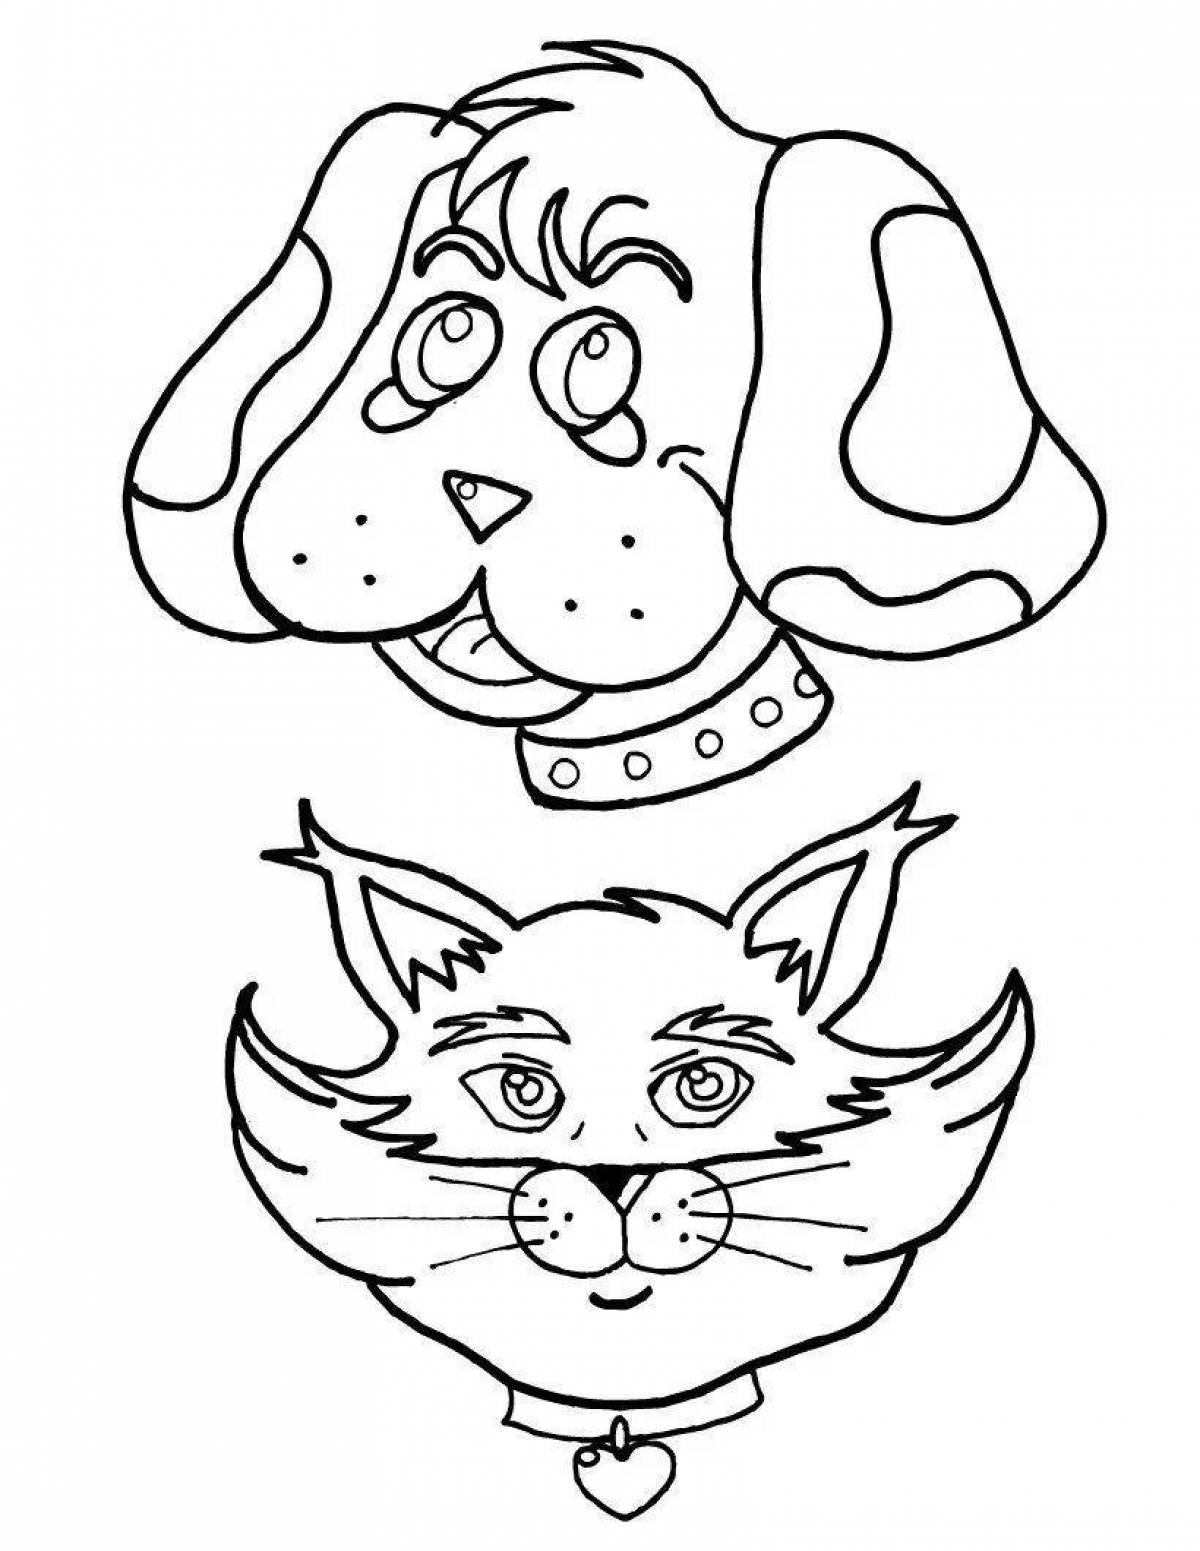 Live coloring page of cats and puppies